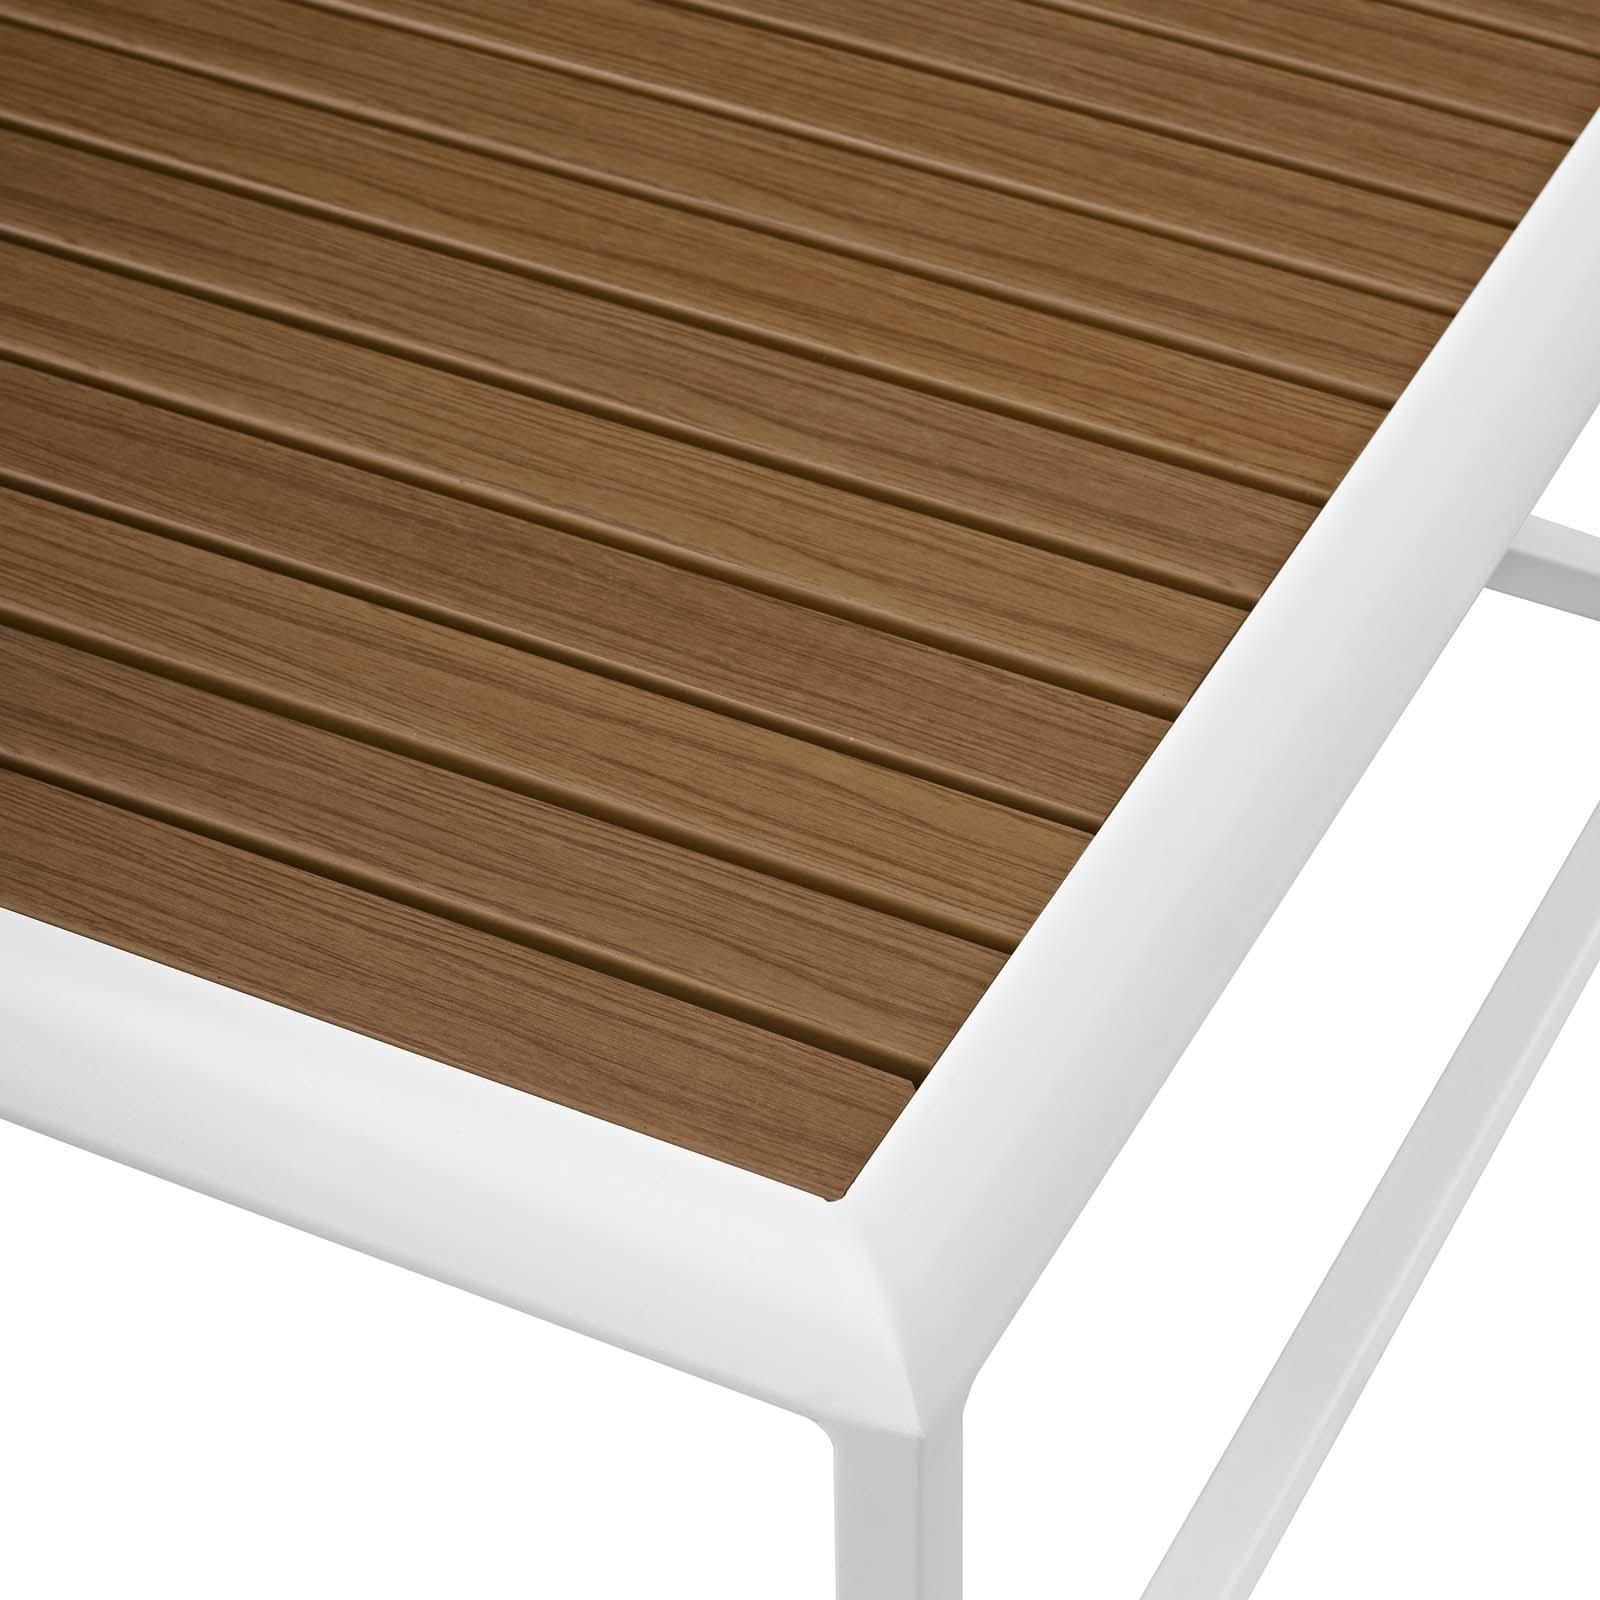 Contemporary Modern Urban Designer Outdoor Patio Balcony Garden Furniture Coffee Side Table, Aluminum Faux Wood, White Natural - image 5 of 5